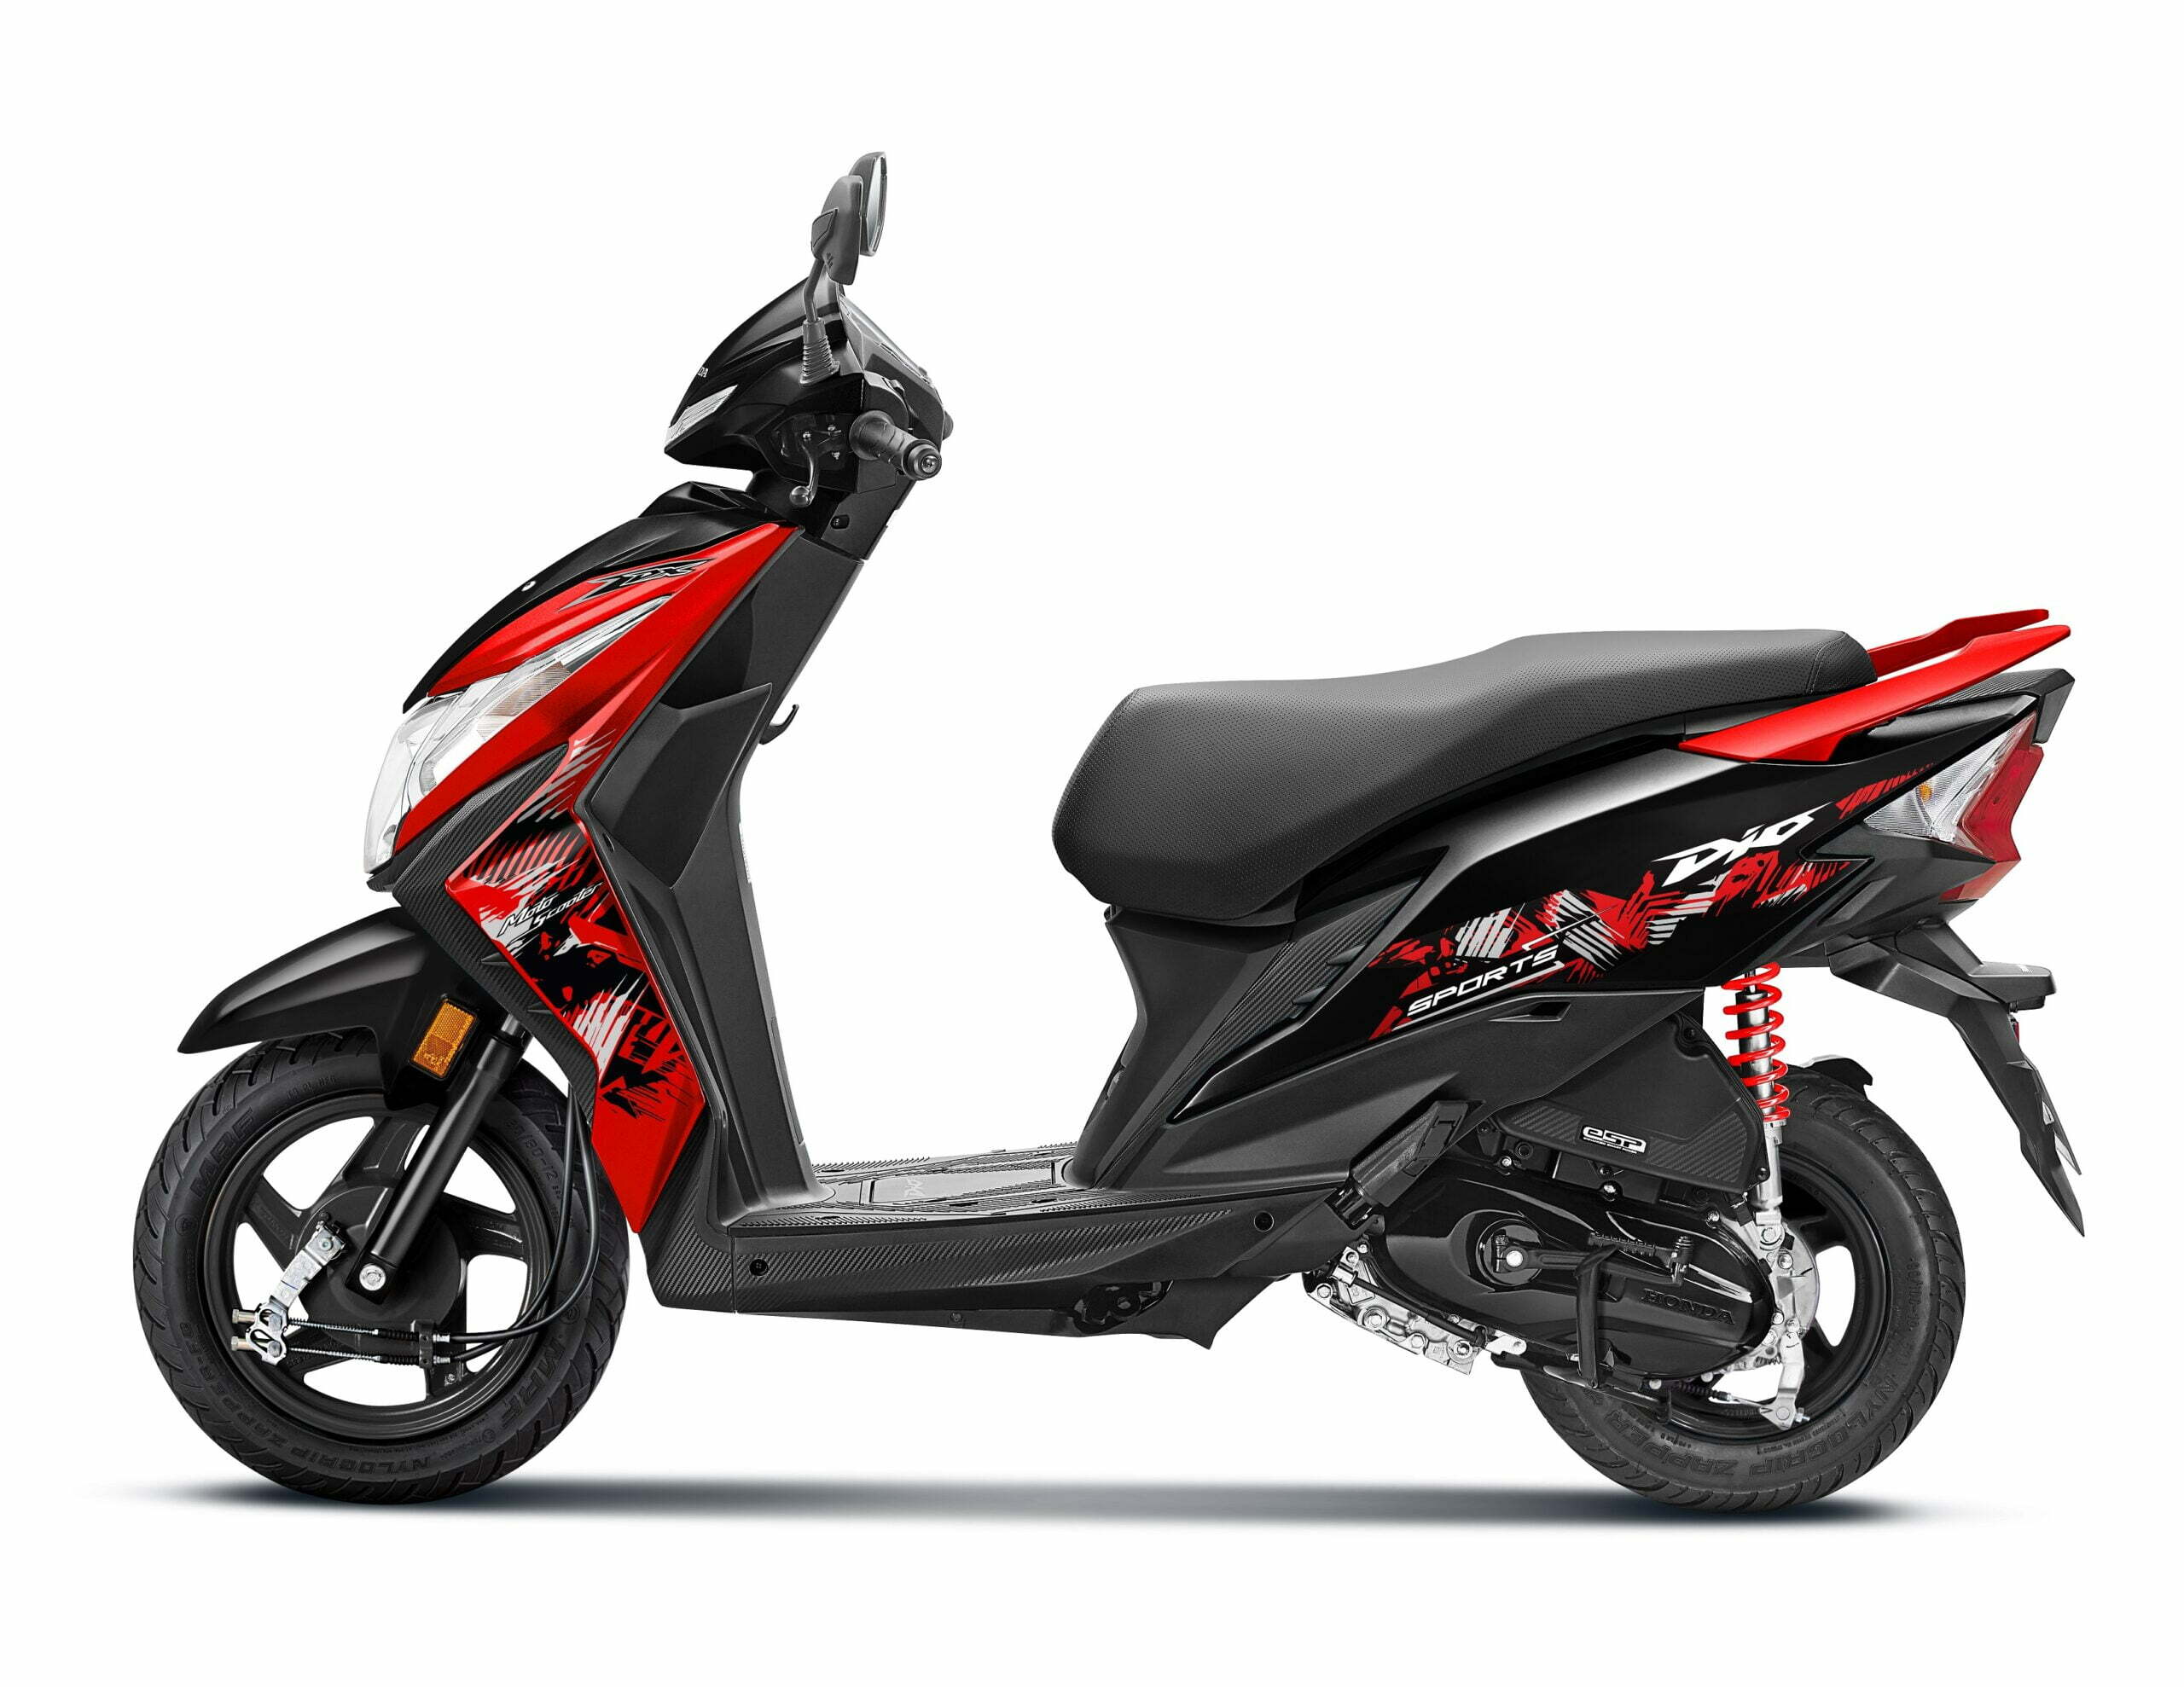 2022 Honda Dio Sports Launched With Cosmetic Updates (1)